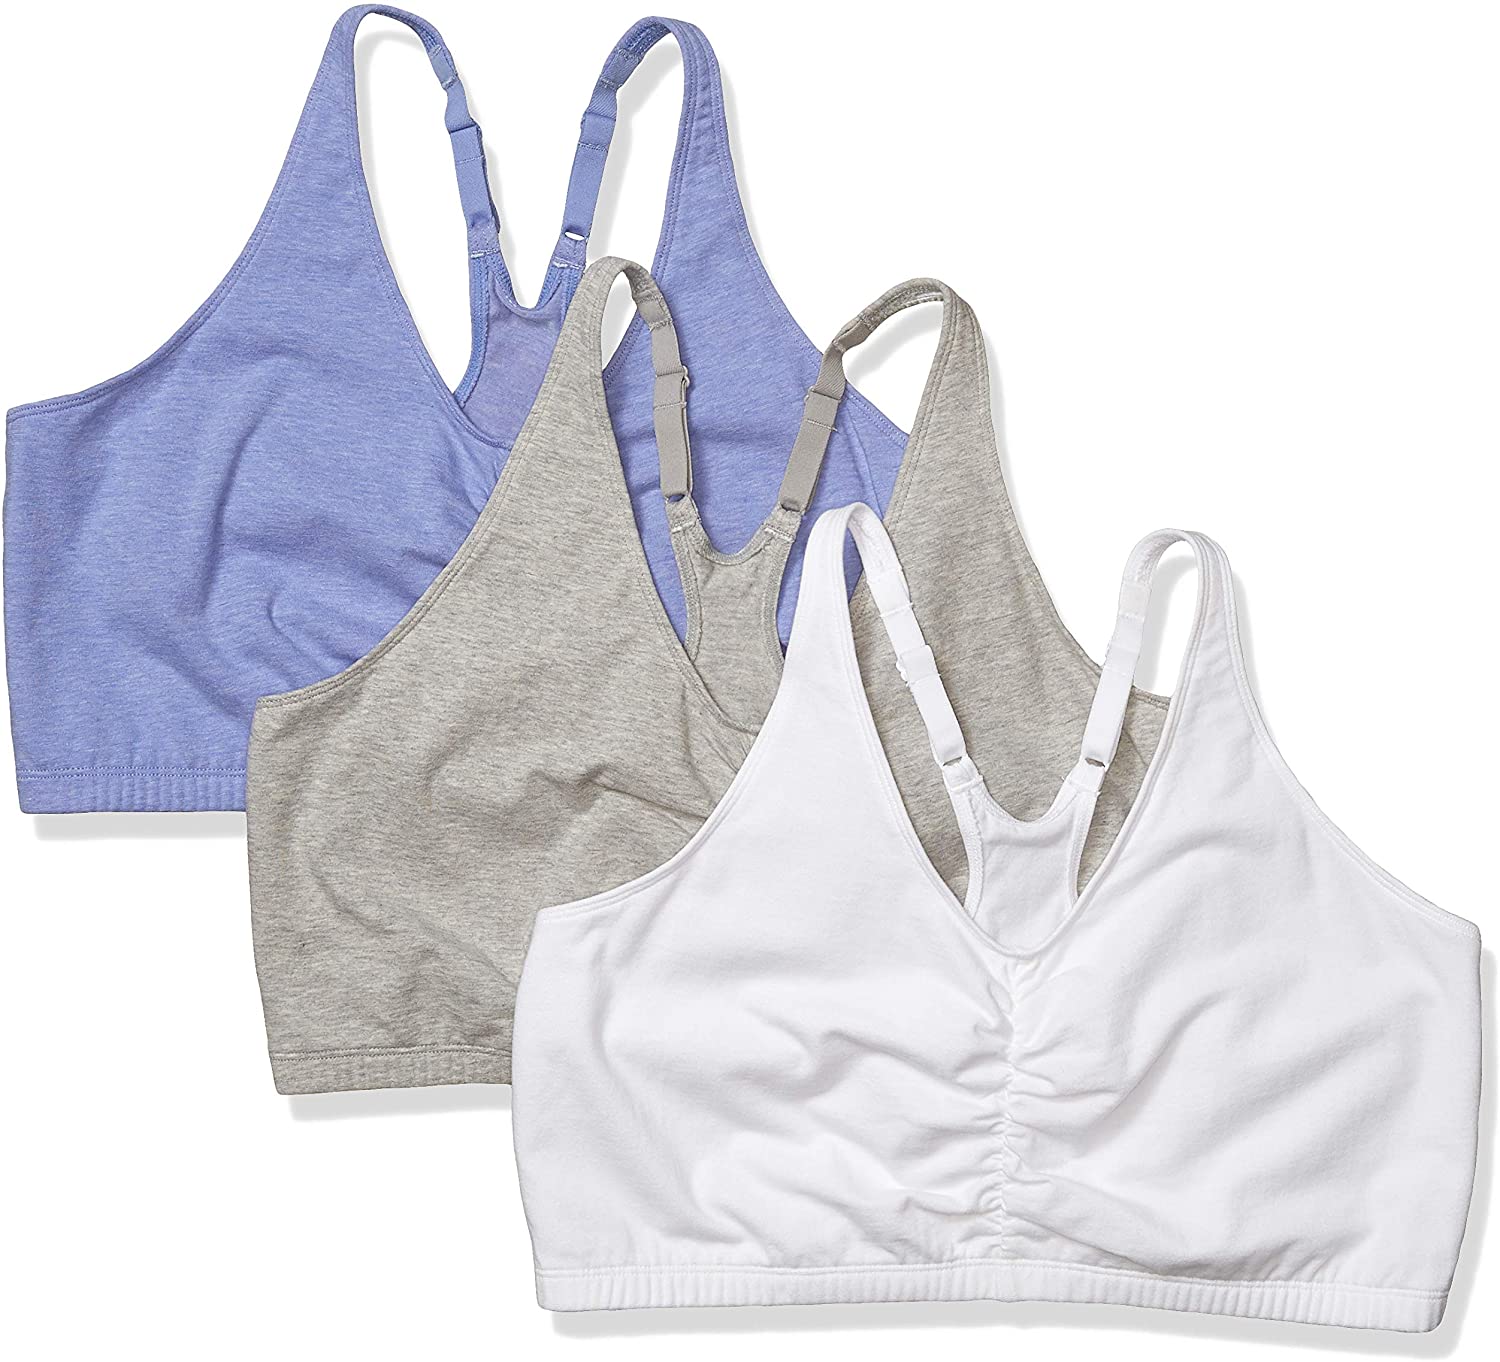 Pack of 3 Sports Bra Fruit of the Loom Womens Adjustable Shirred Front Racerback Bra 